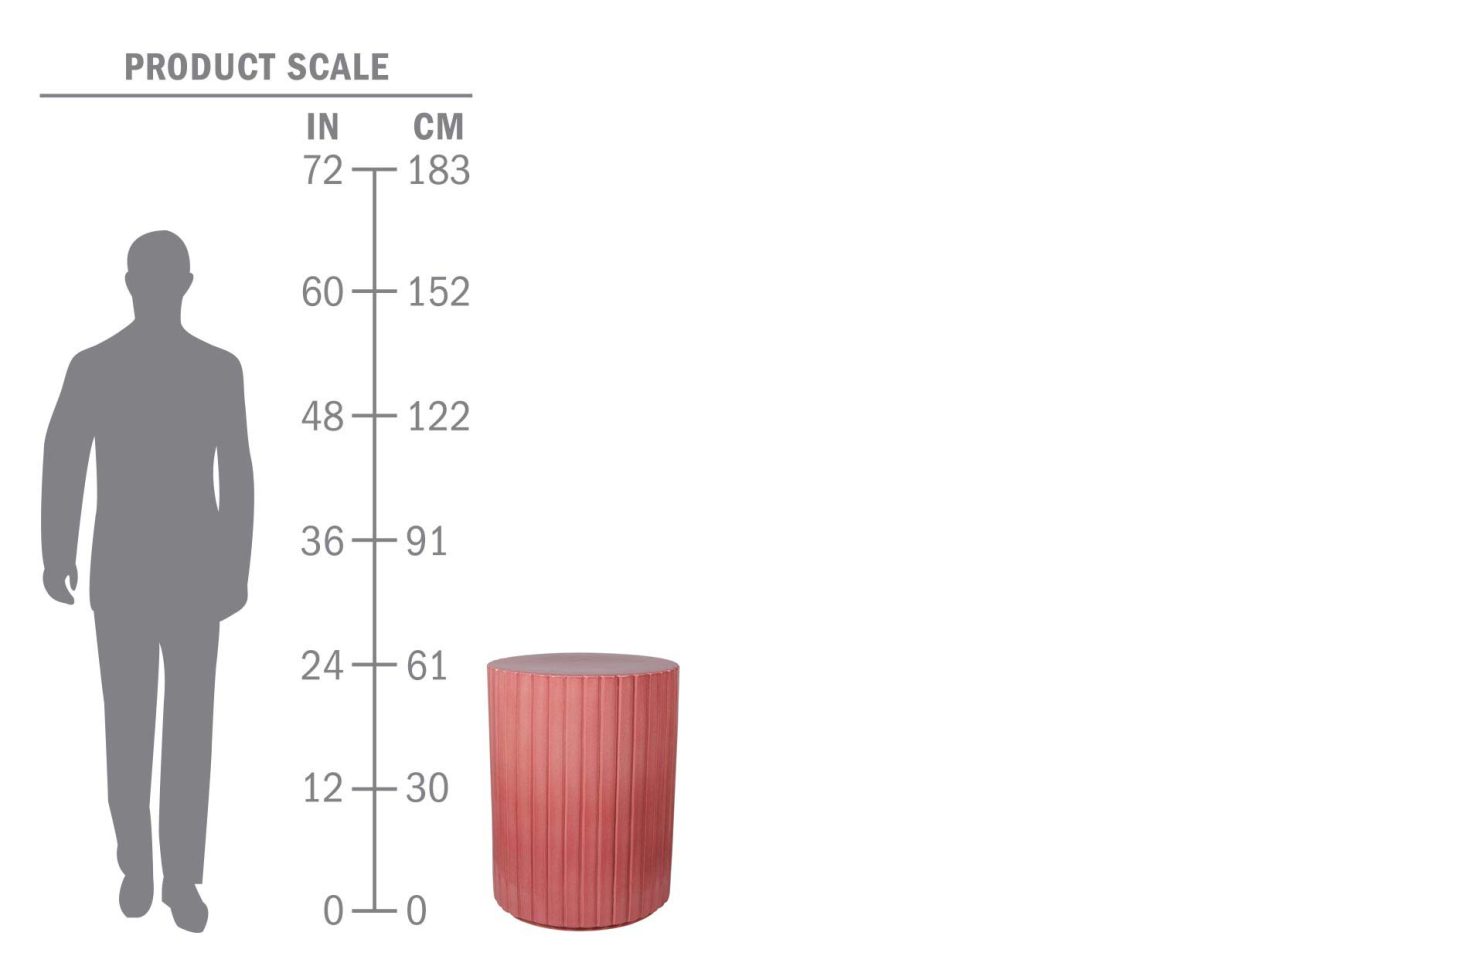 cer kara accent table scale human